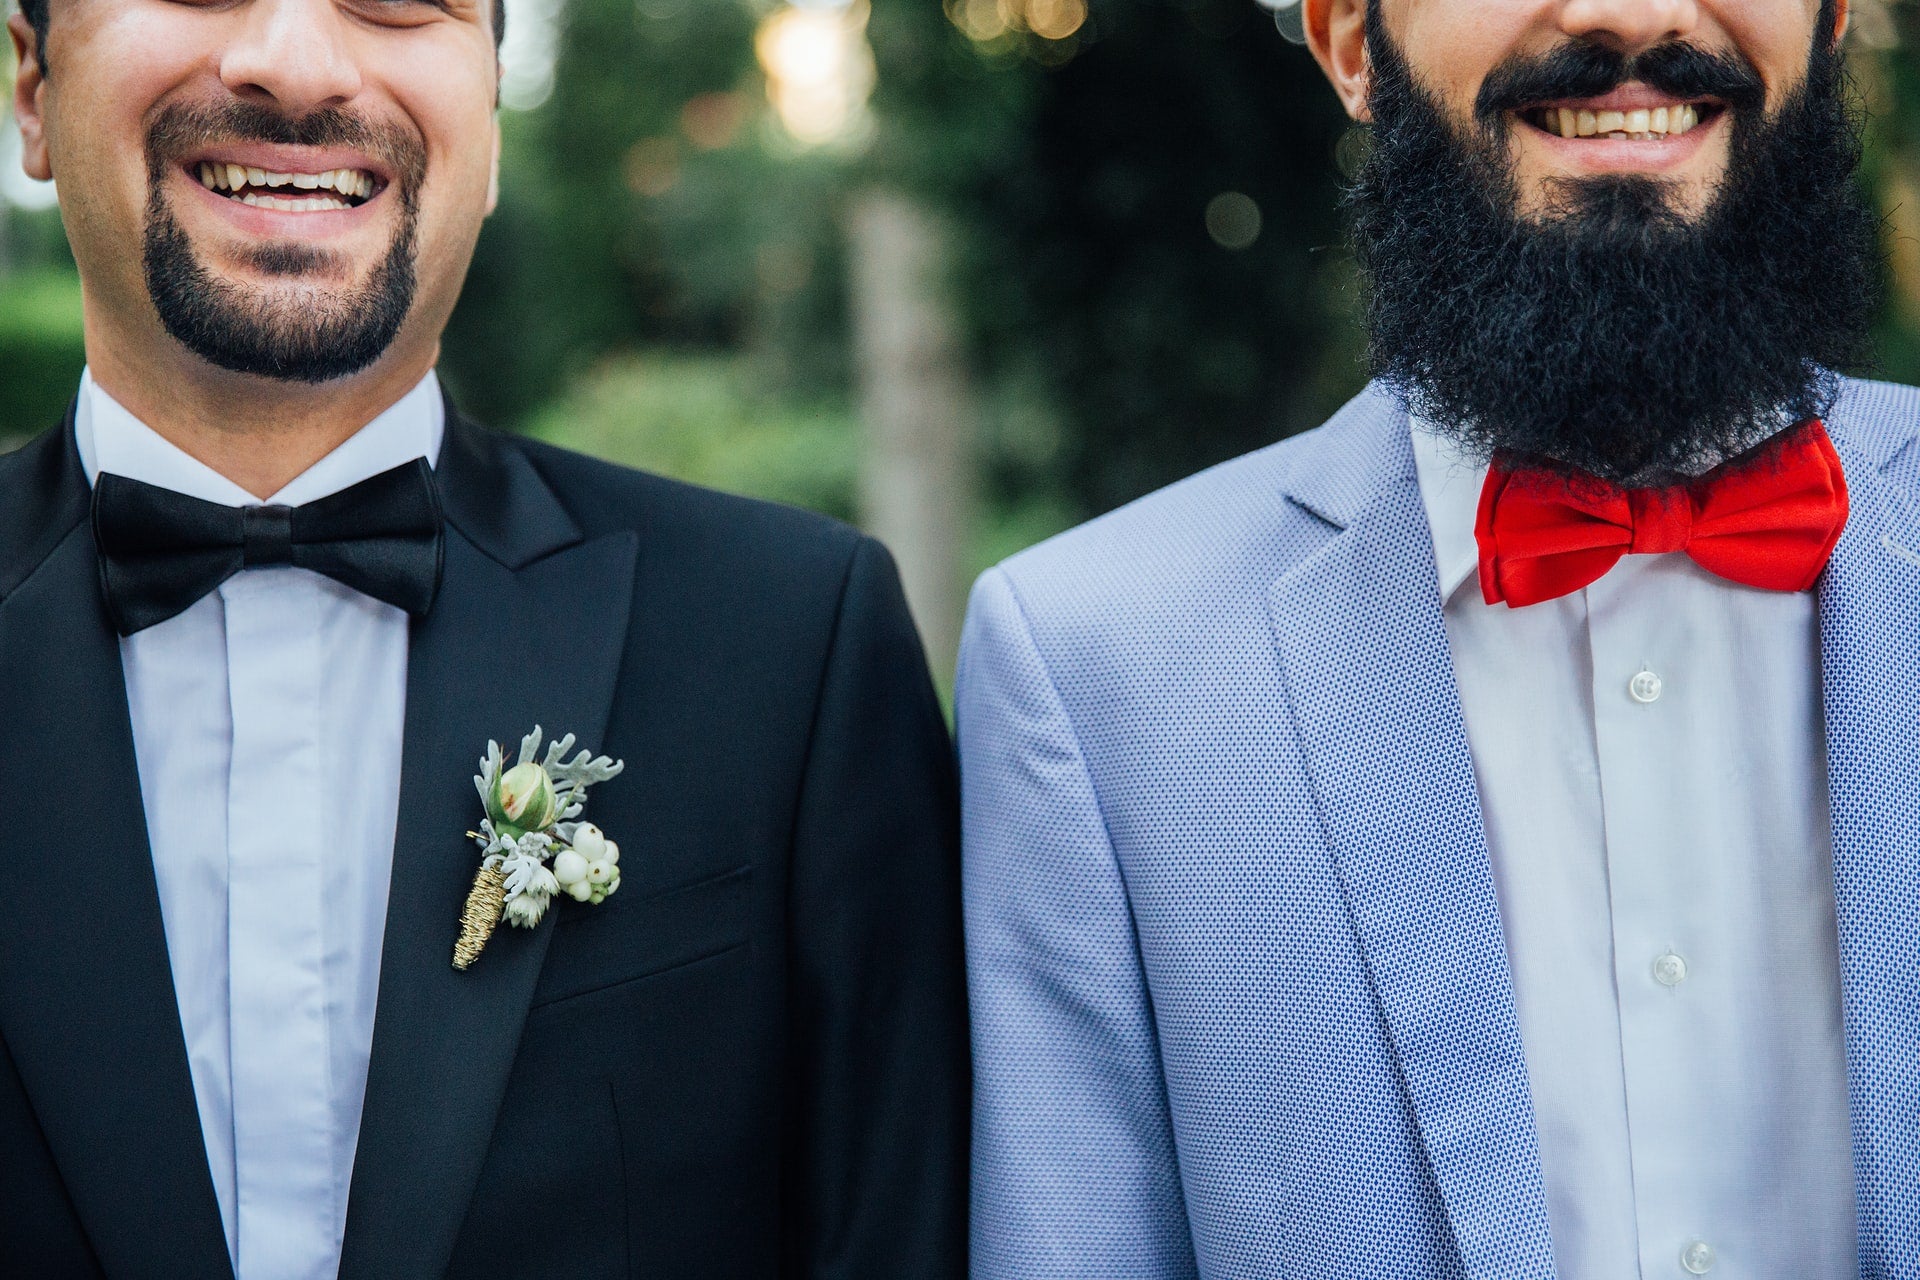 Best Wedding Gift Ideas for Same-Sex Couples